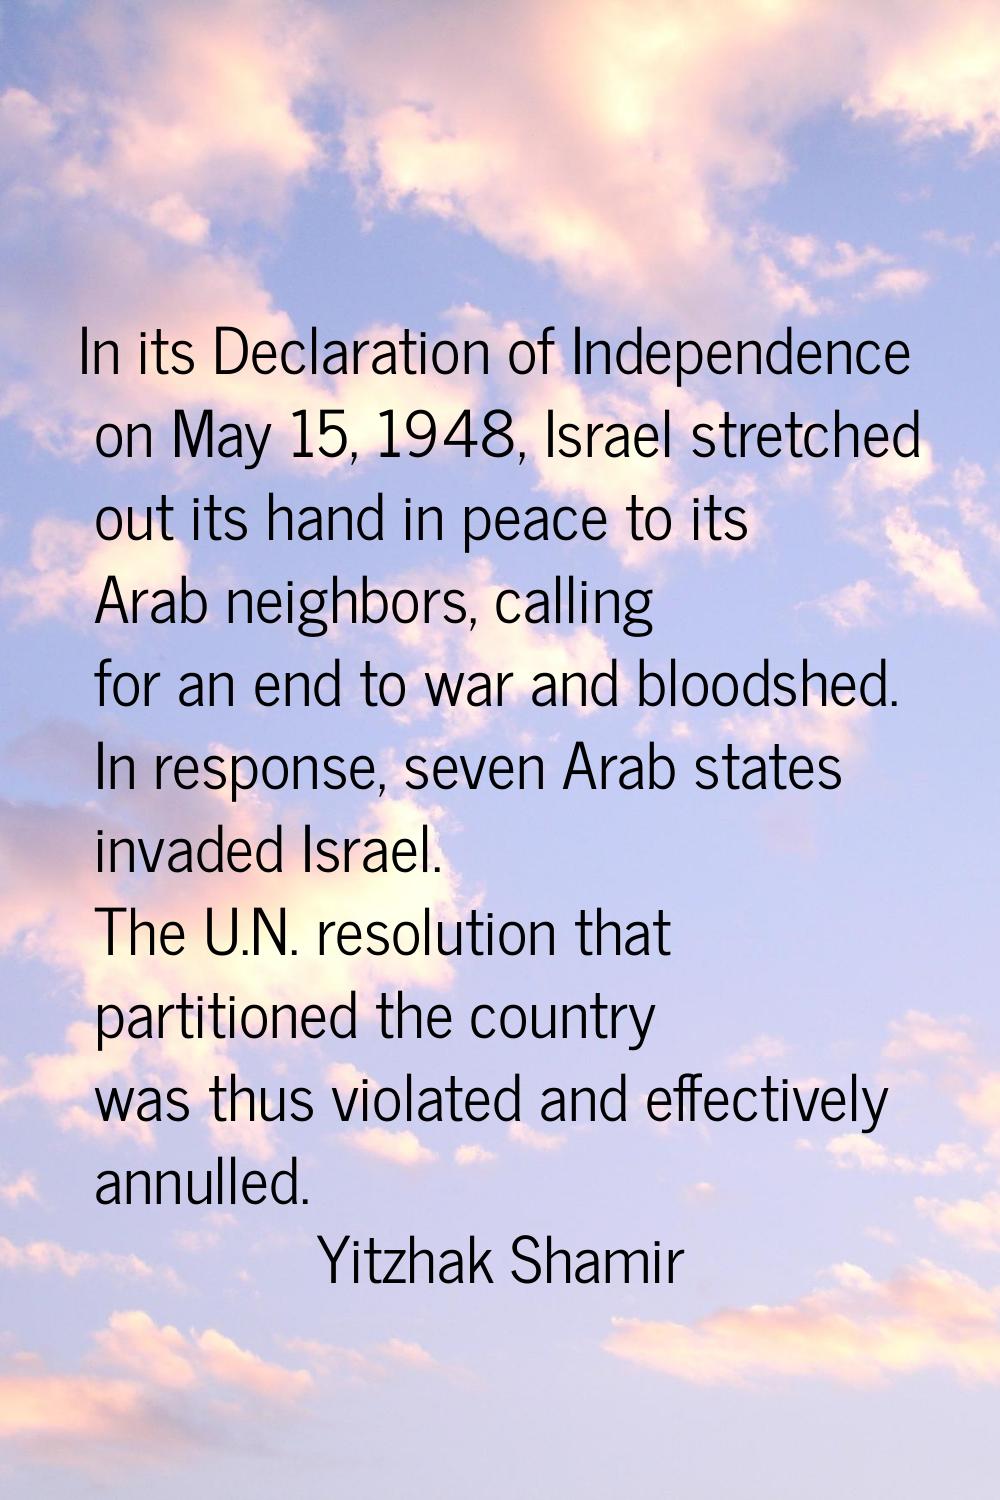 In its Declaration of Independence on May 15, 1948, Israel stretched out its hand in peace to its A